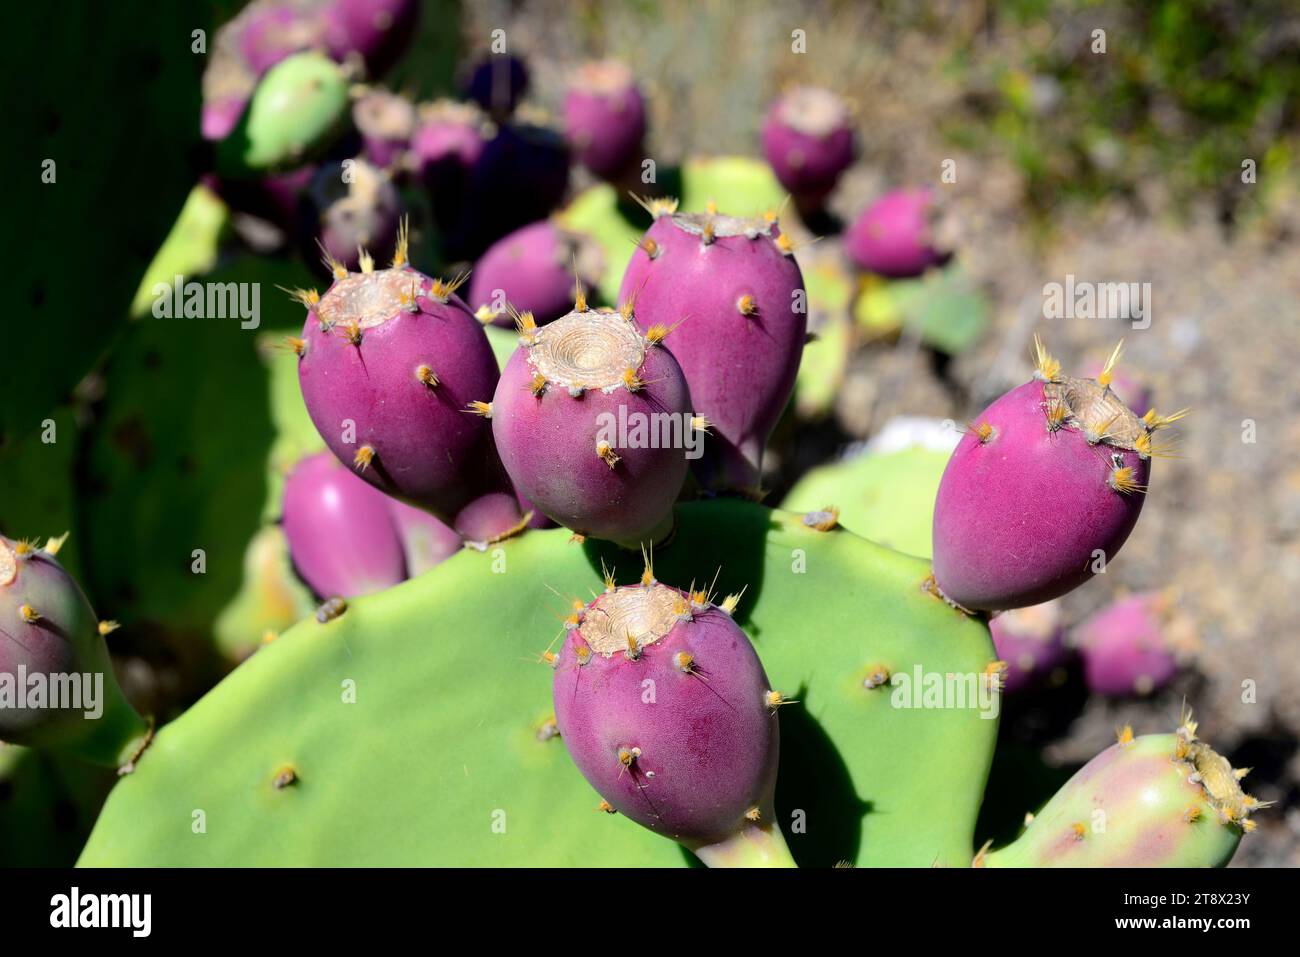 Opuntia dillenii is a cactus native to Mexico, USA and Caribbean Islands but naturalized in many arid or semiarid regions of the World. This photo was Stock Photo